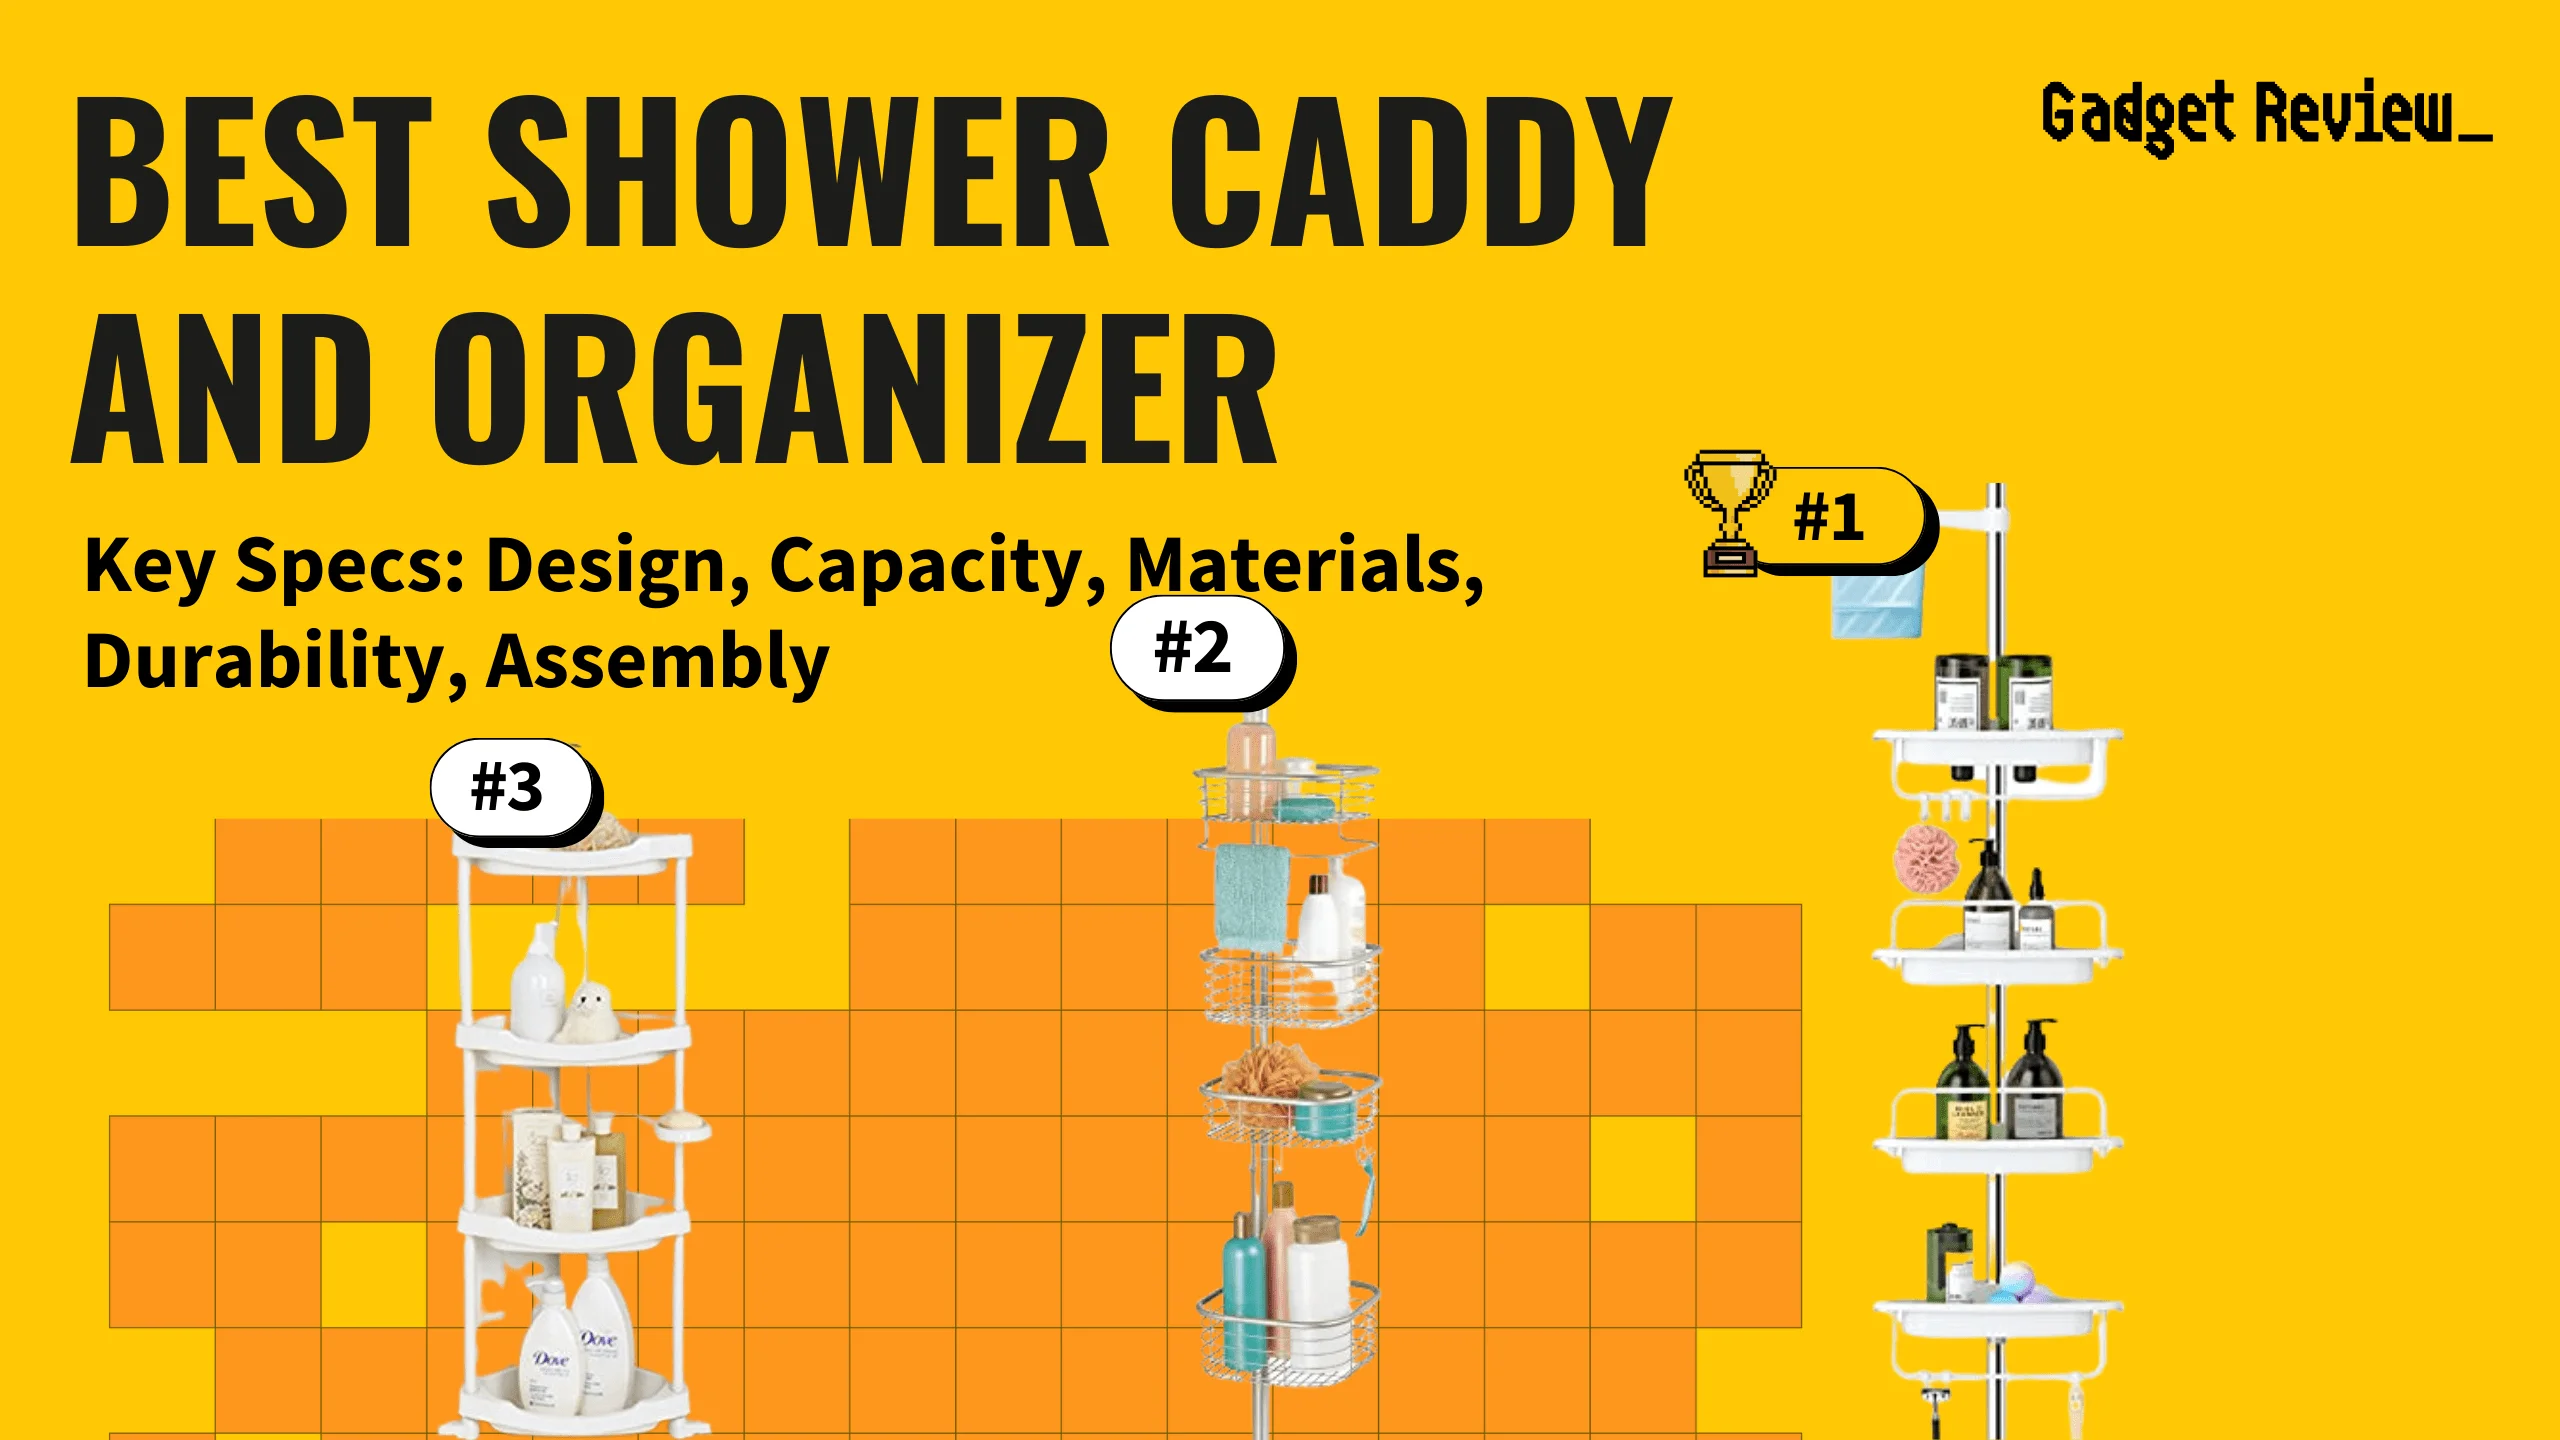 best shower caddy featured image that shows the top three best bathroom essential models